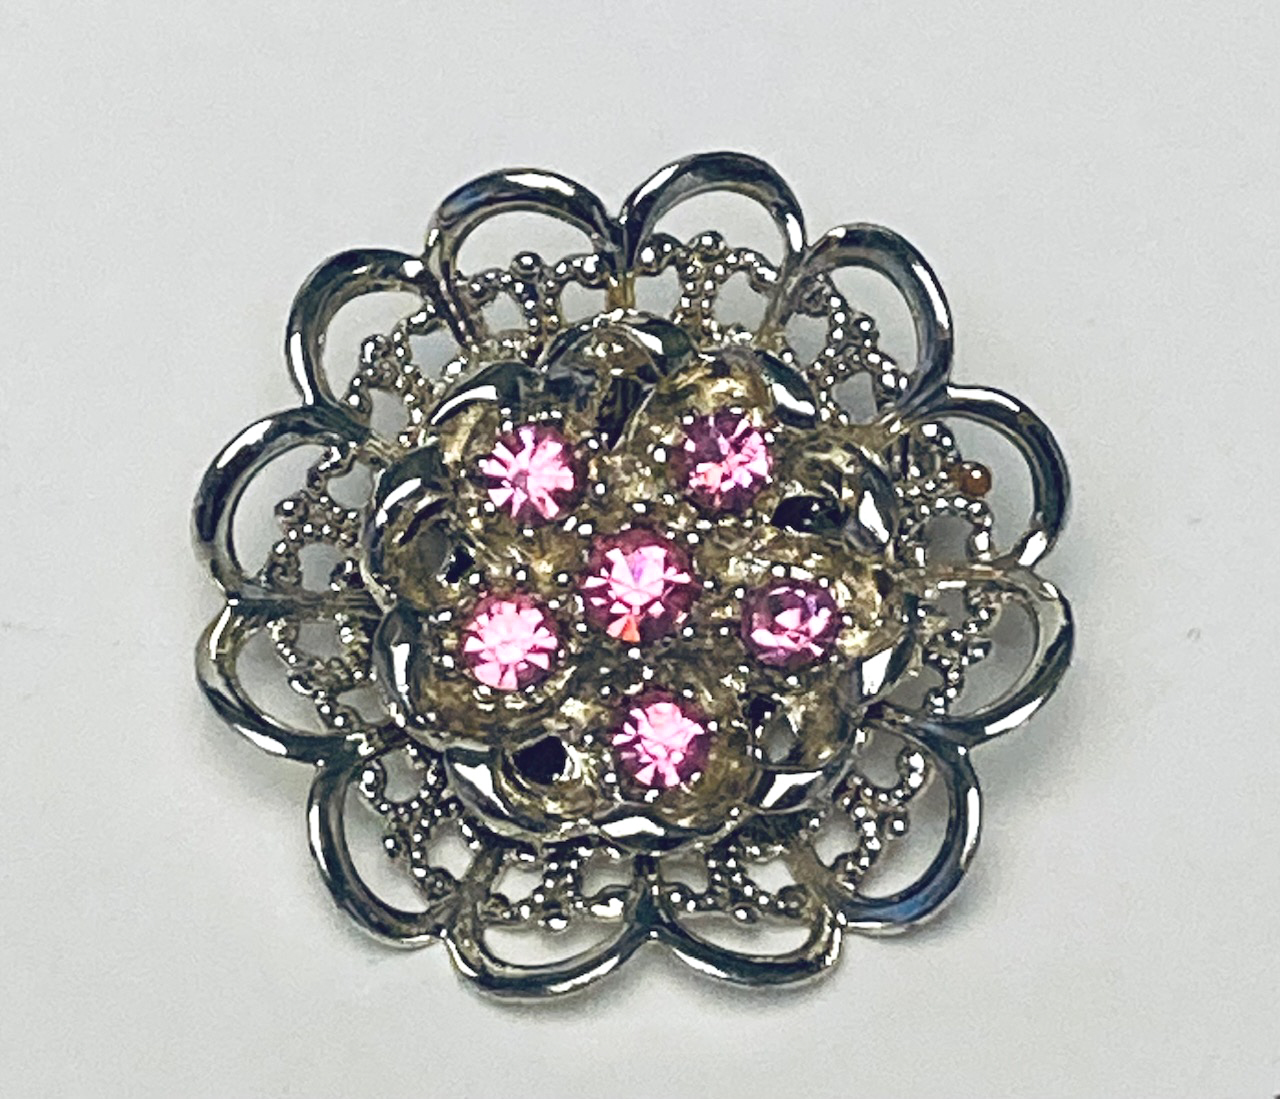 Silver tone pin brooch with pink crystals fashion jewelry - $5.00